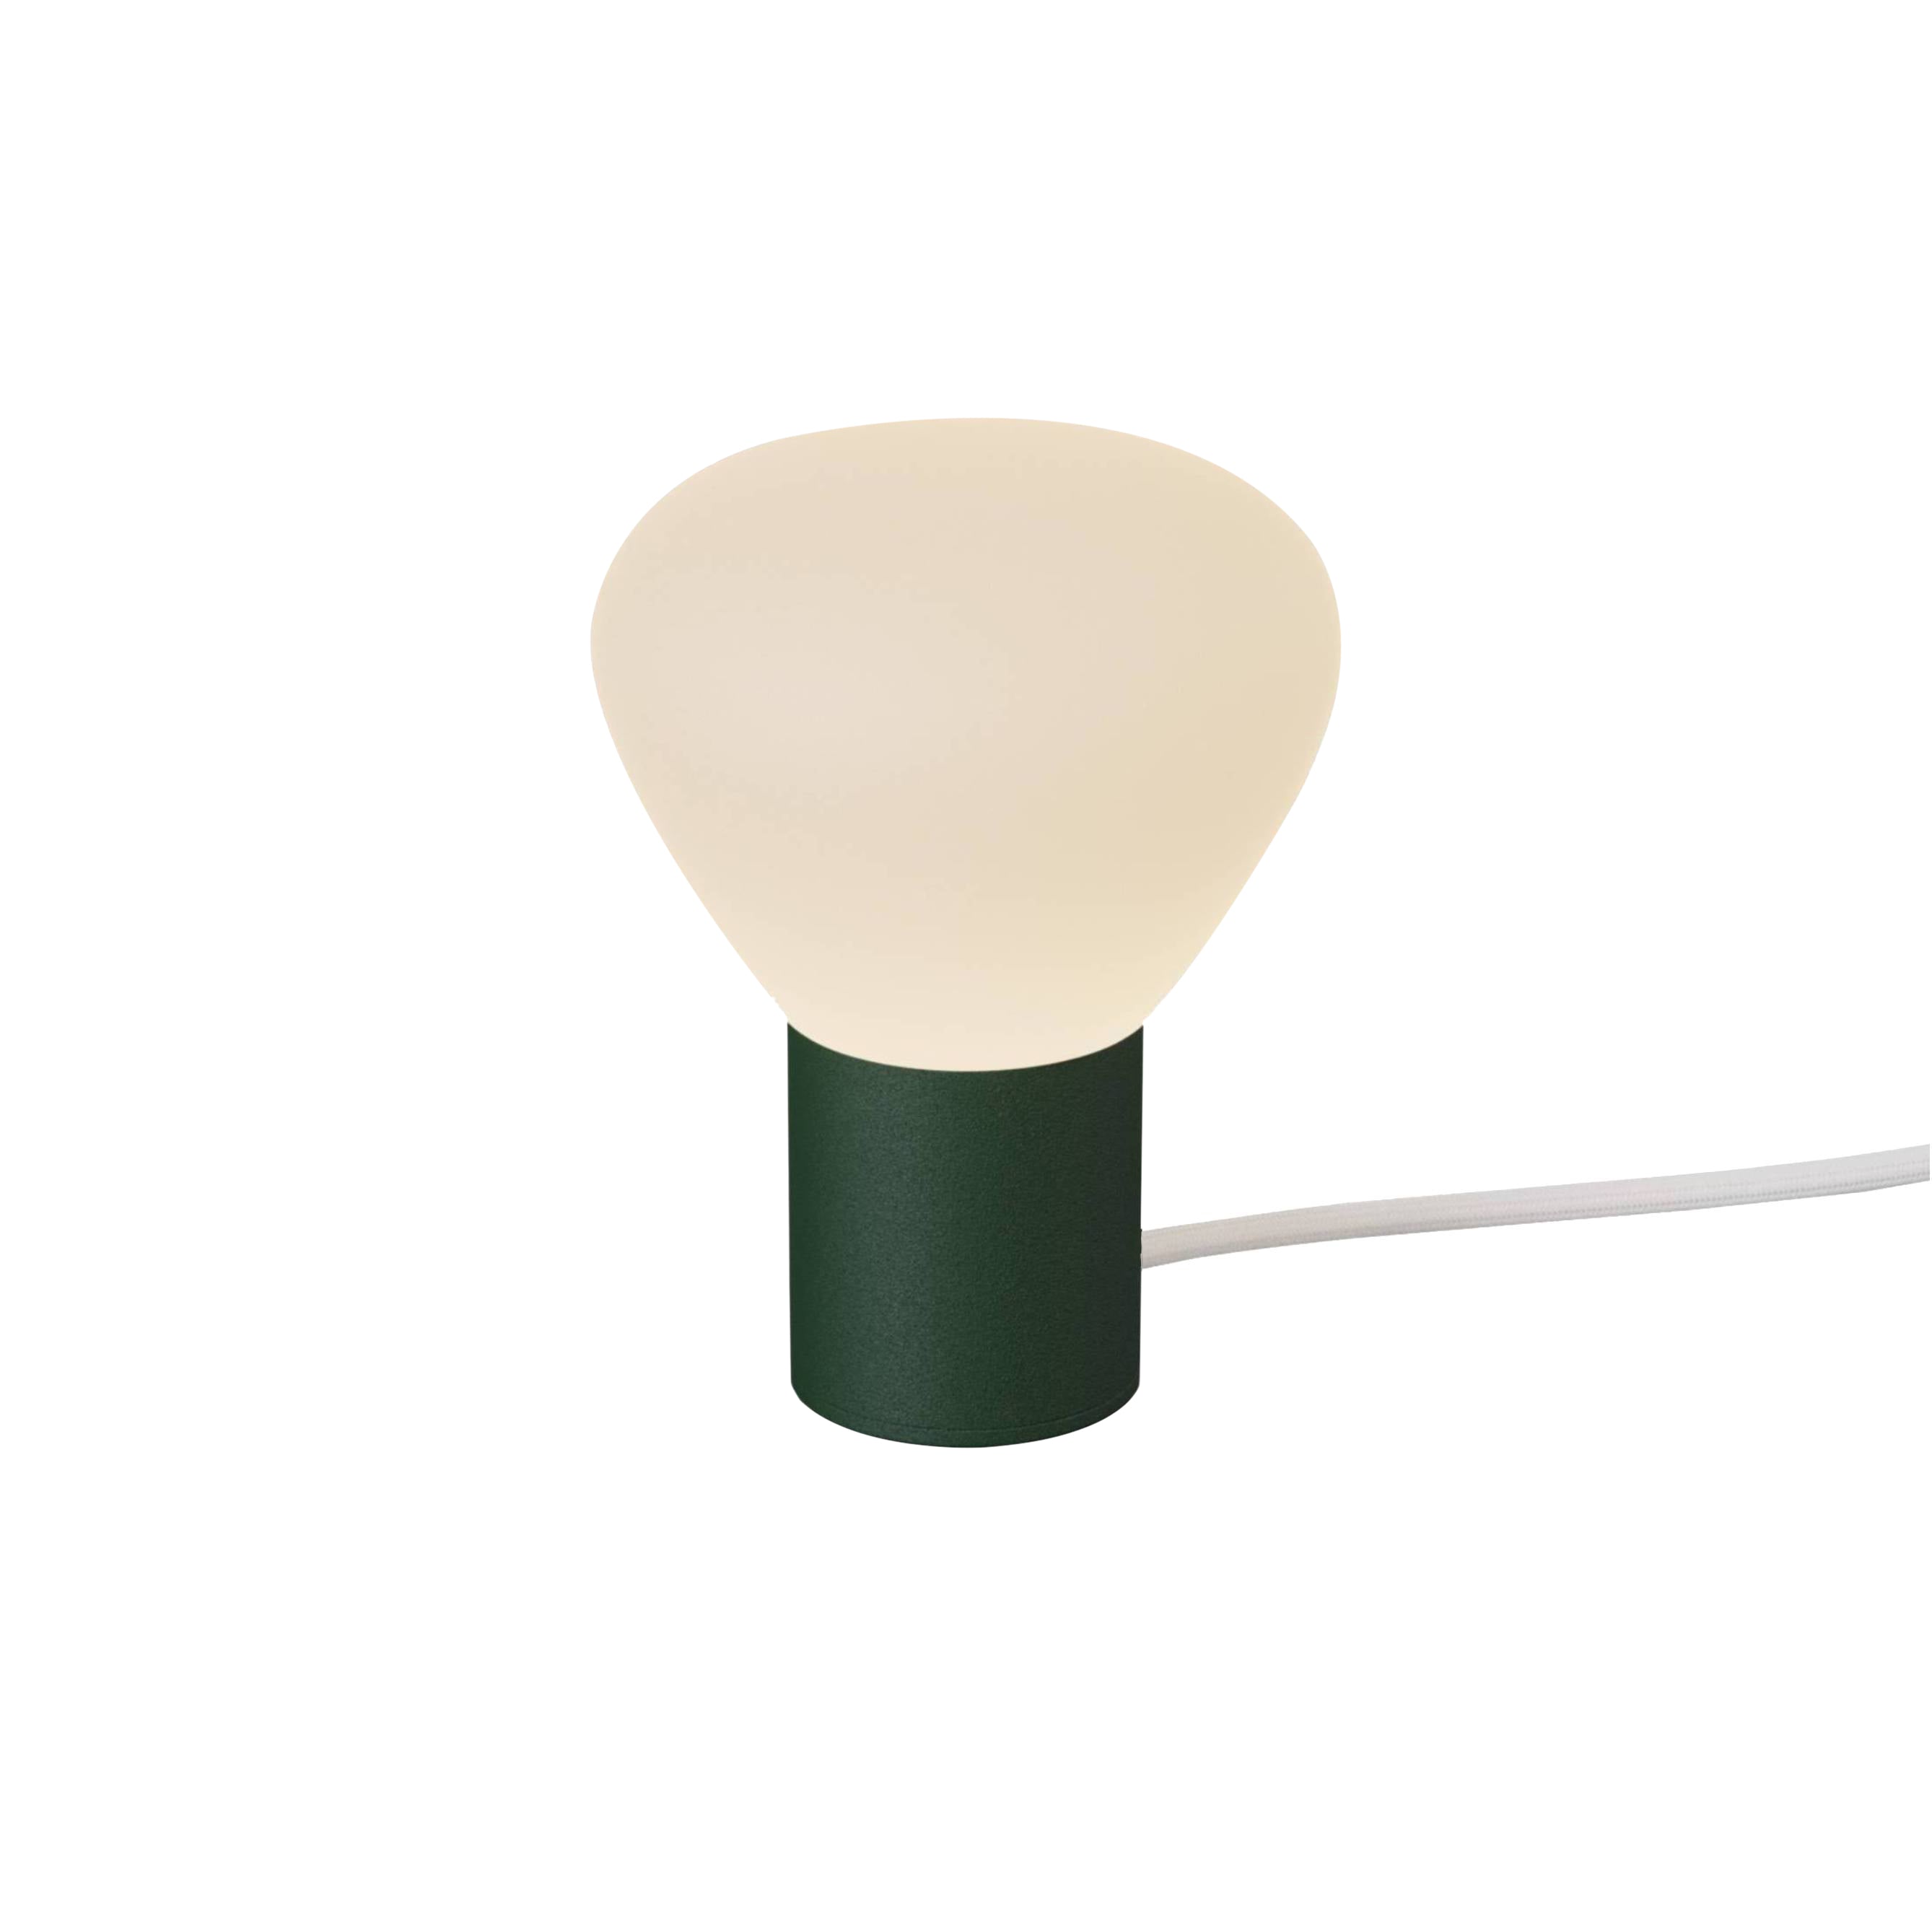 Parc 01 Table Lamp: Footswitch + Green + White